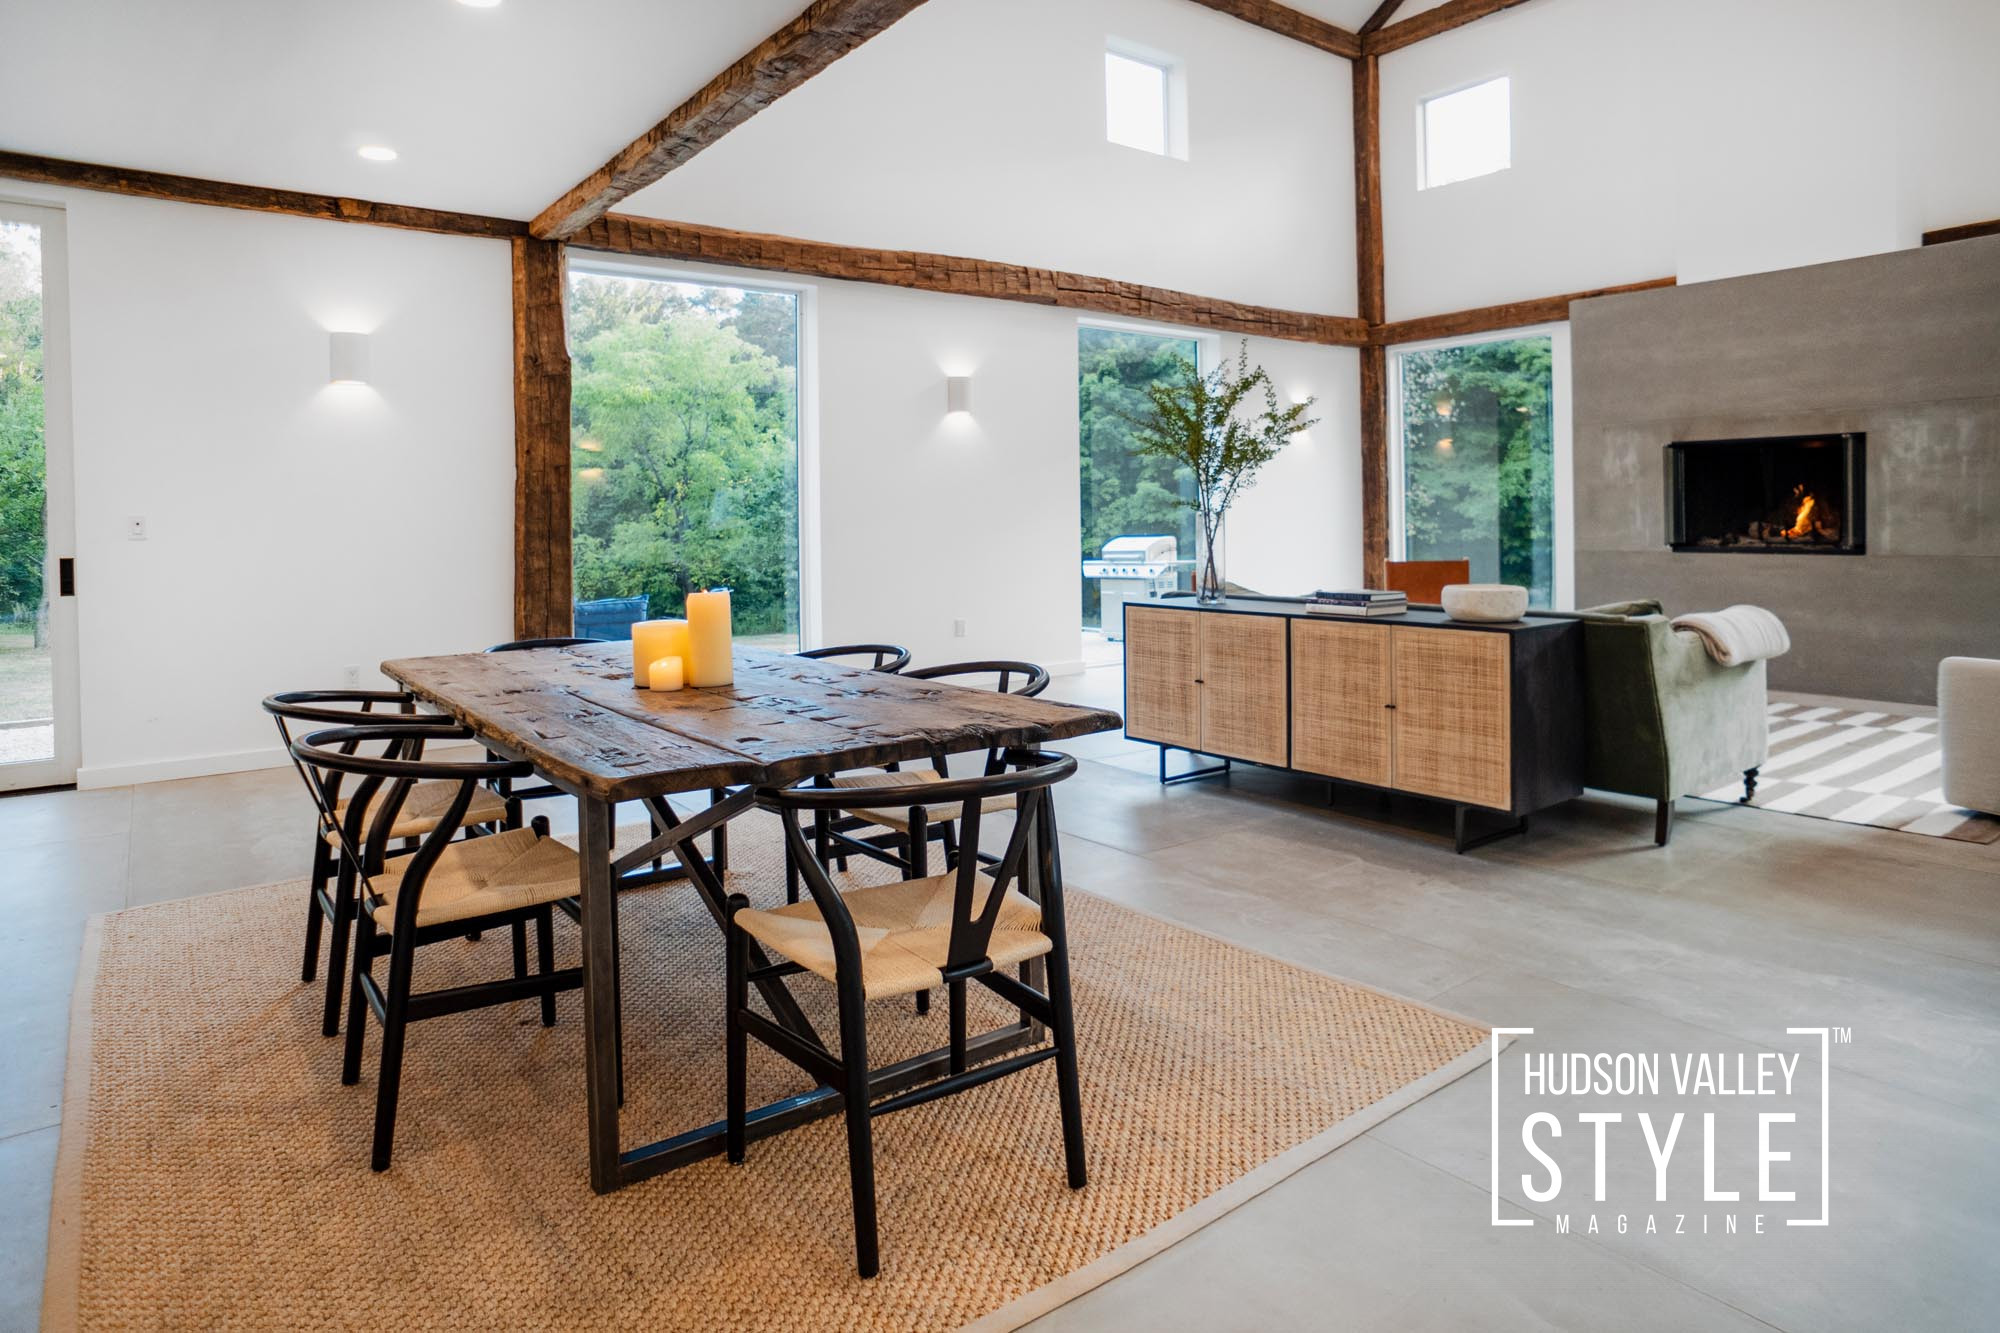 Airbnb Review of a Converted Barn Overlooking Apsley Hill Farm – Hudson Valley Airbnb Reviews with Photographer Maxwell Alexander – Best Airbnb Photography in the Hudson Valley, Upstate, NYC and Hamptons